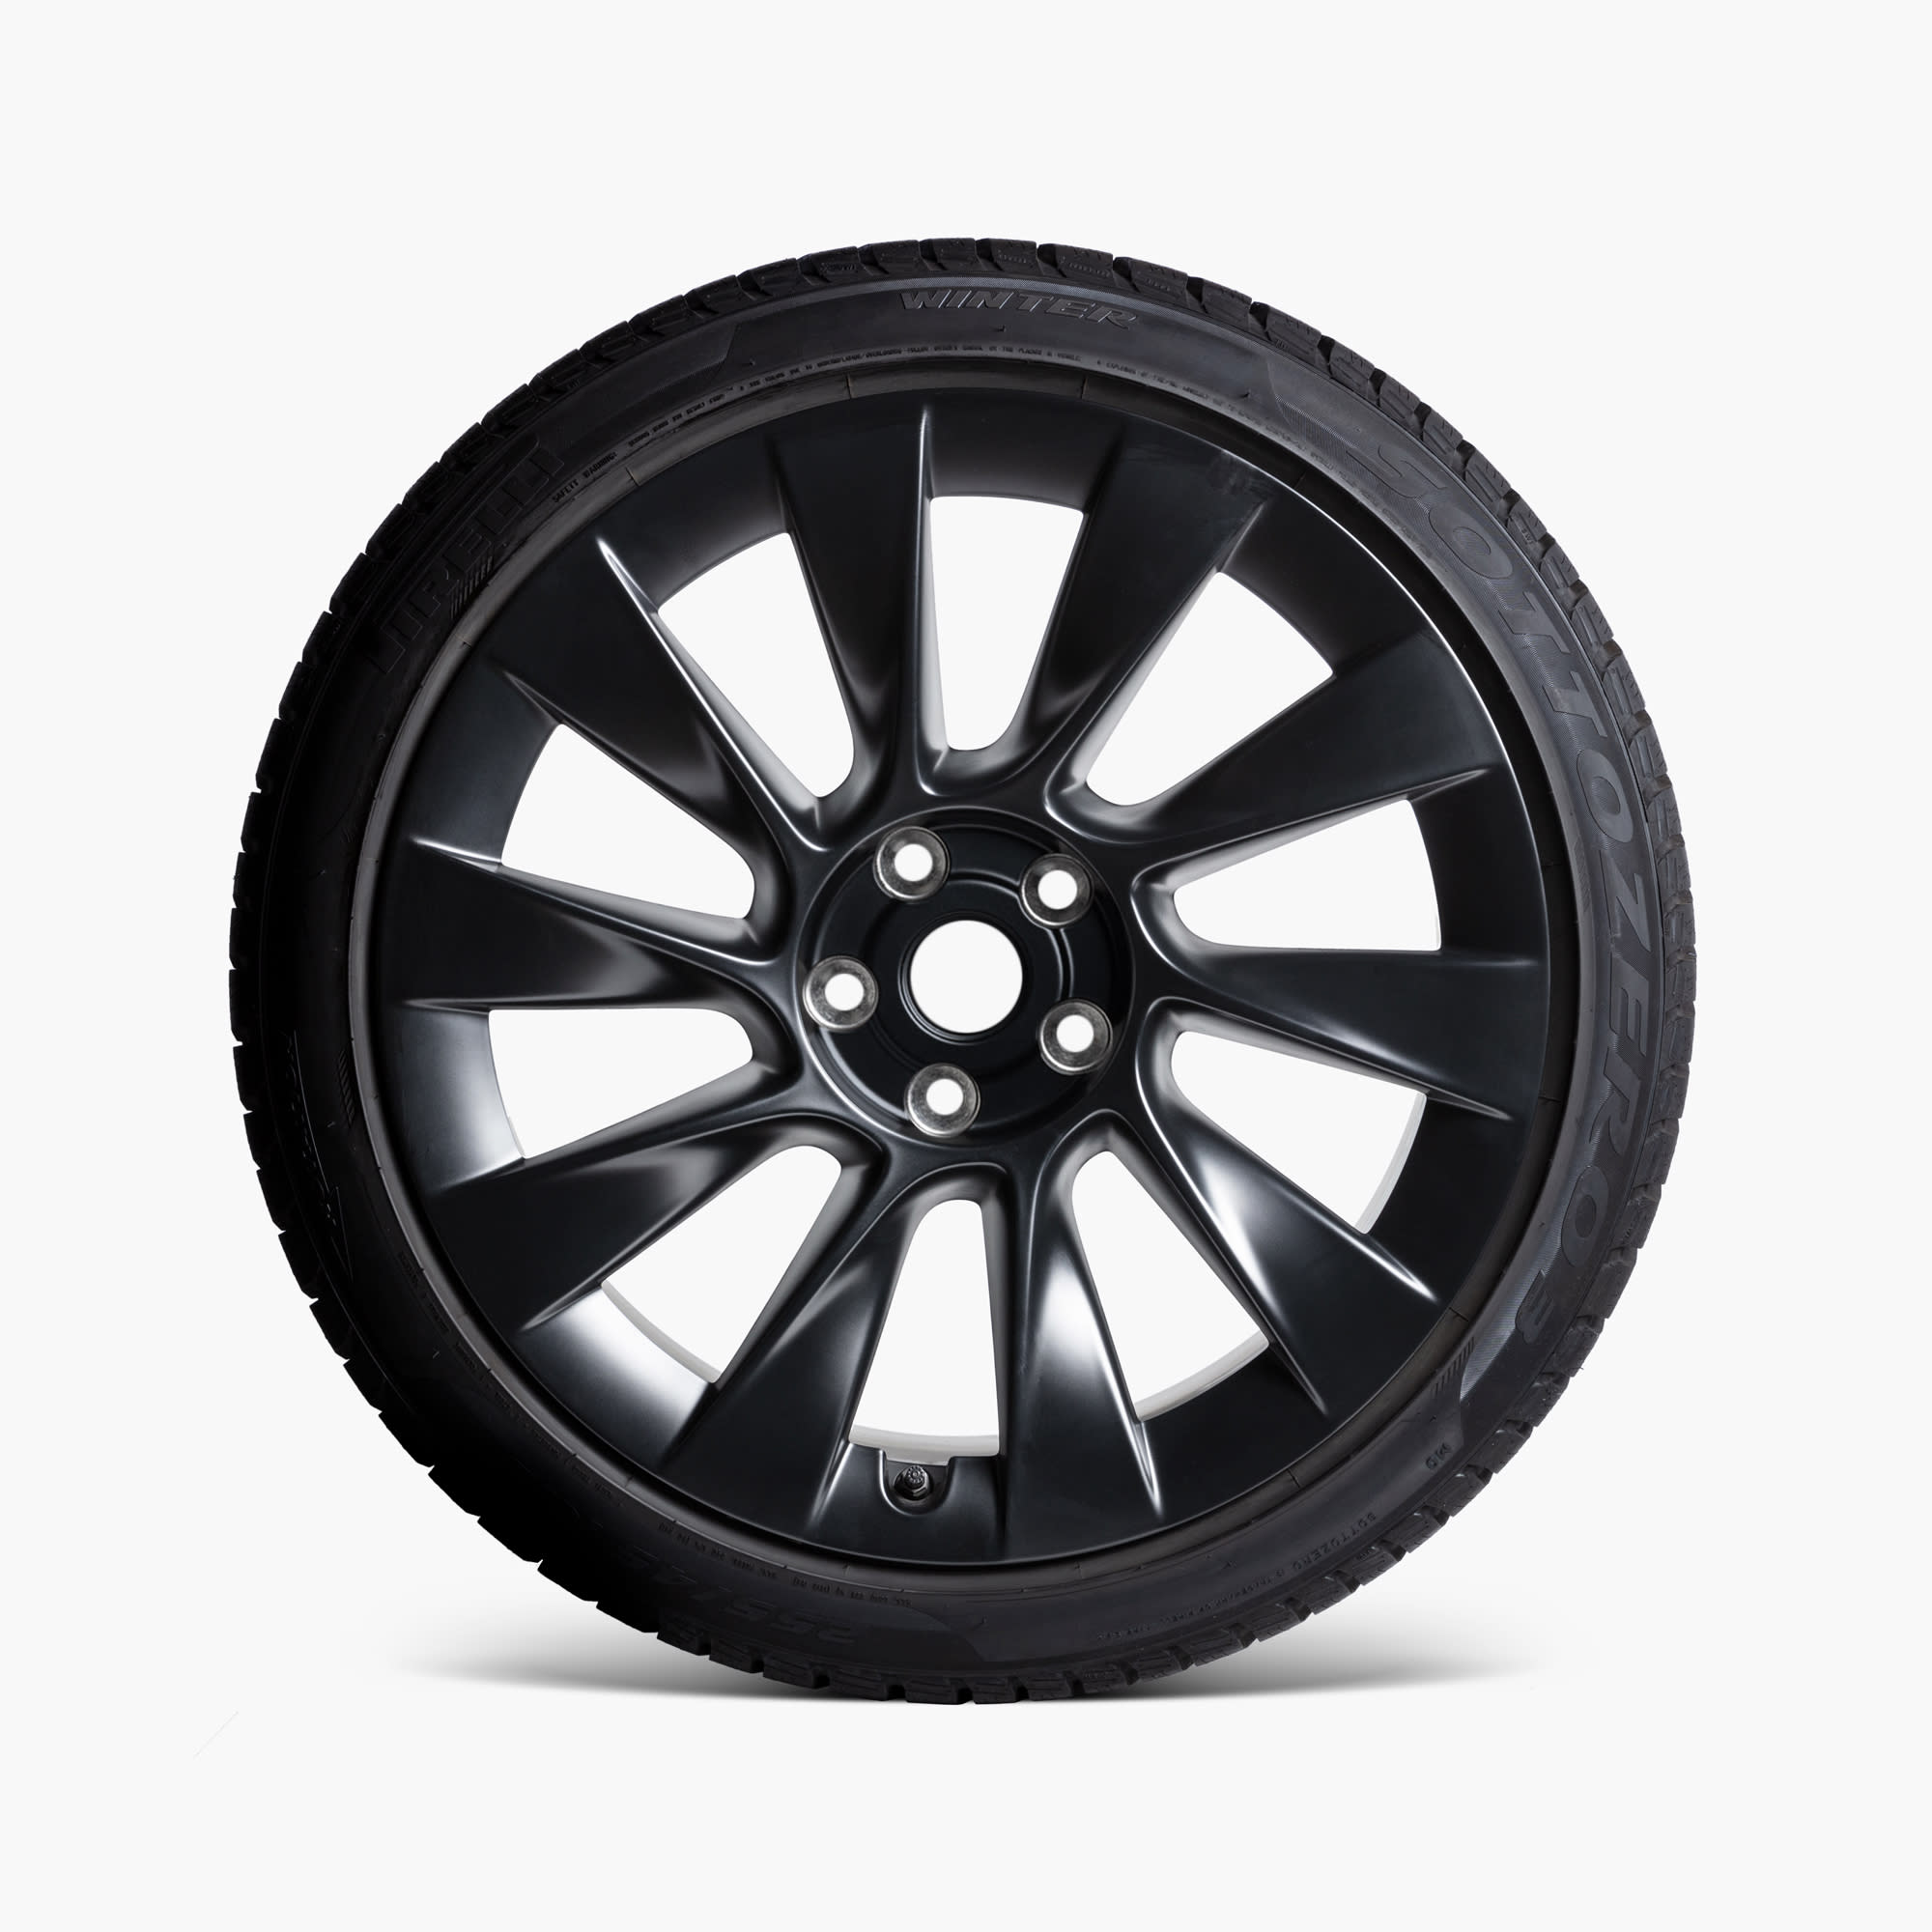 Model Y 20" Induction Wheel and Pirelli Winter Tire Package